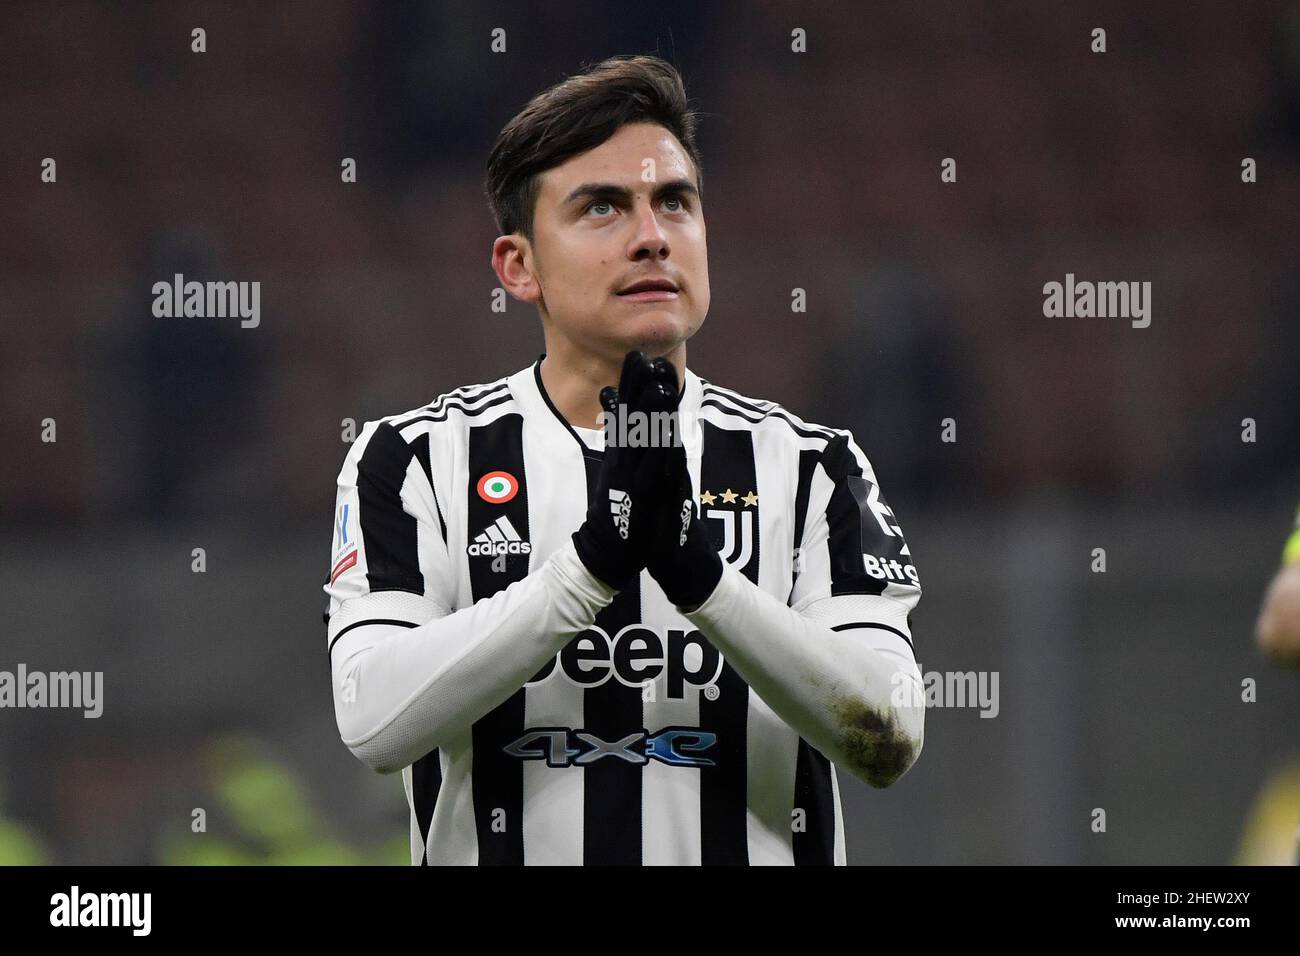 Page 24 - Paulo dybala High Resolution Stock Photography and Images - Alamy